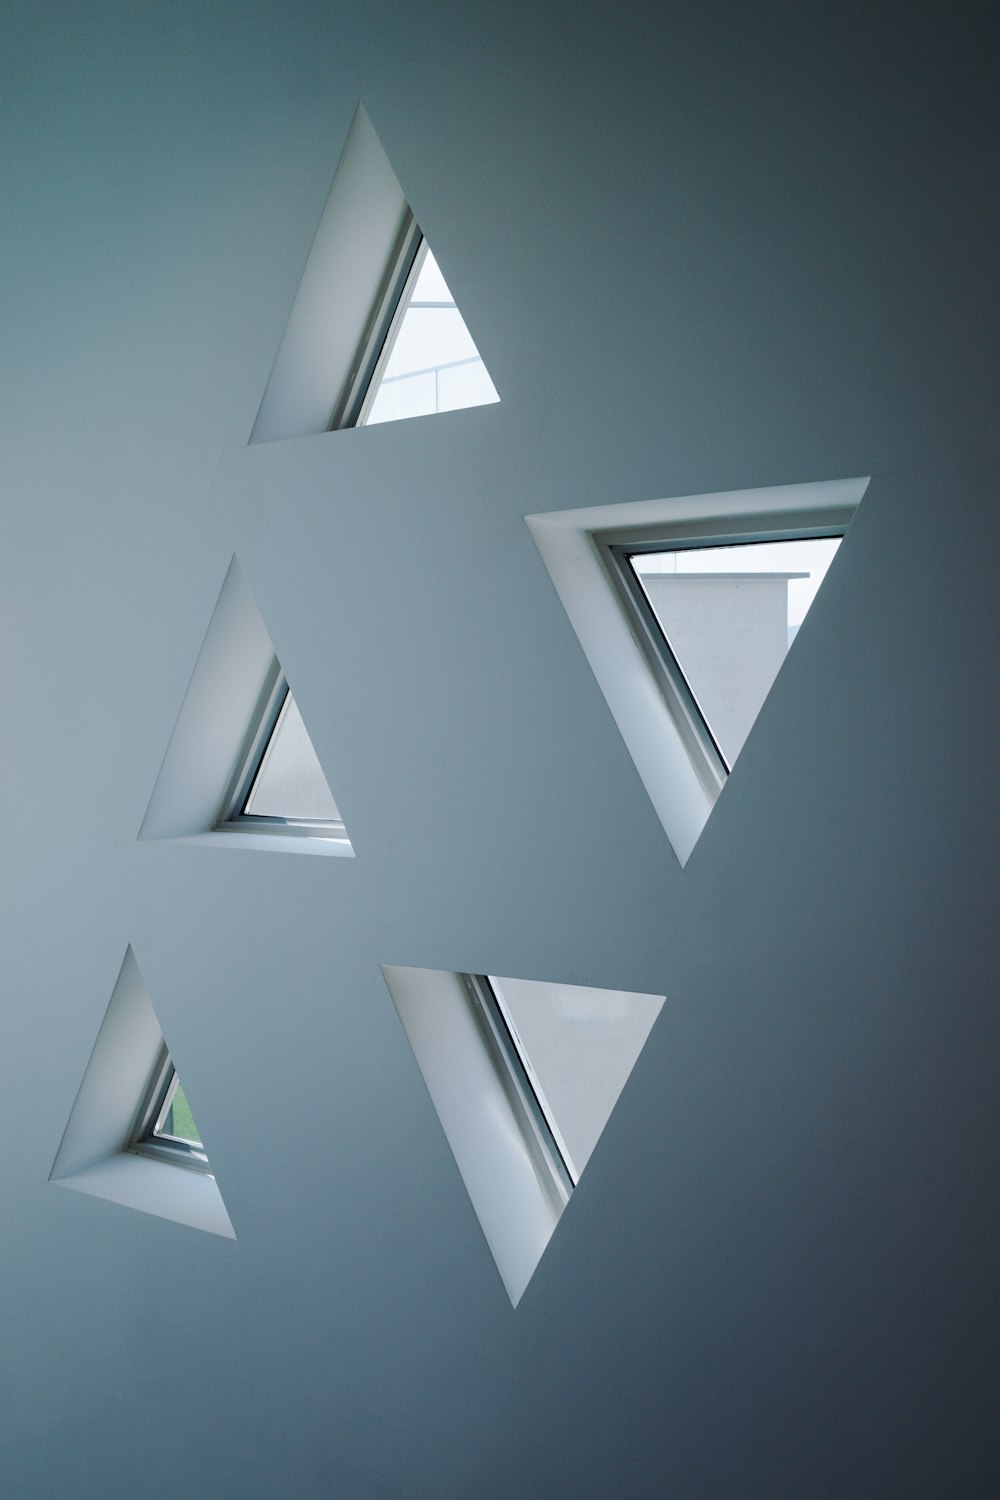 a group of triangular windows in a white room